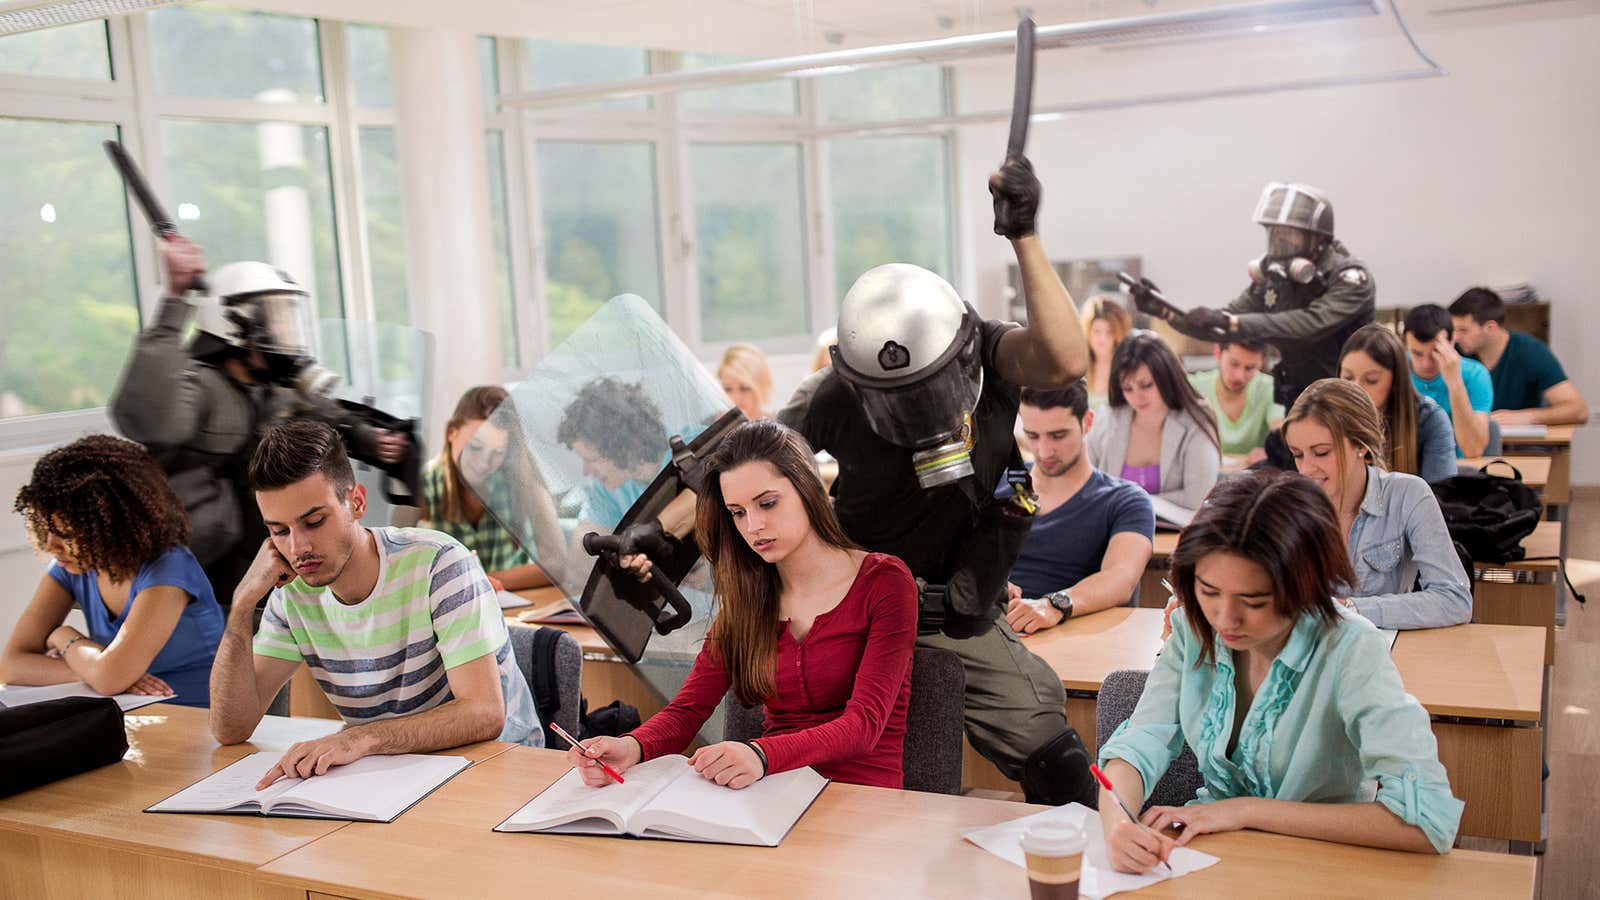 Image for Bored Riot Cops Break Up Calculus Class